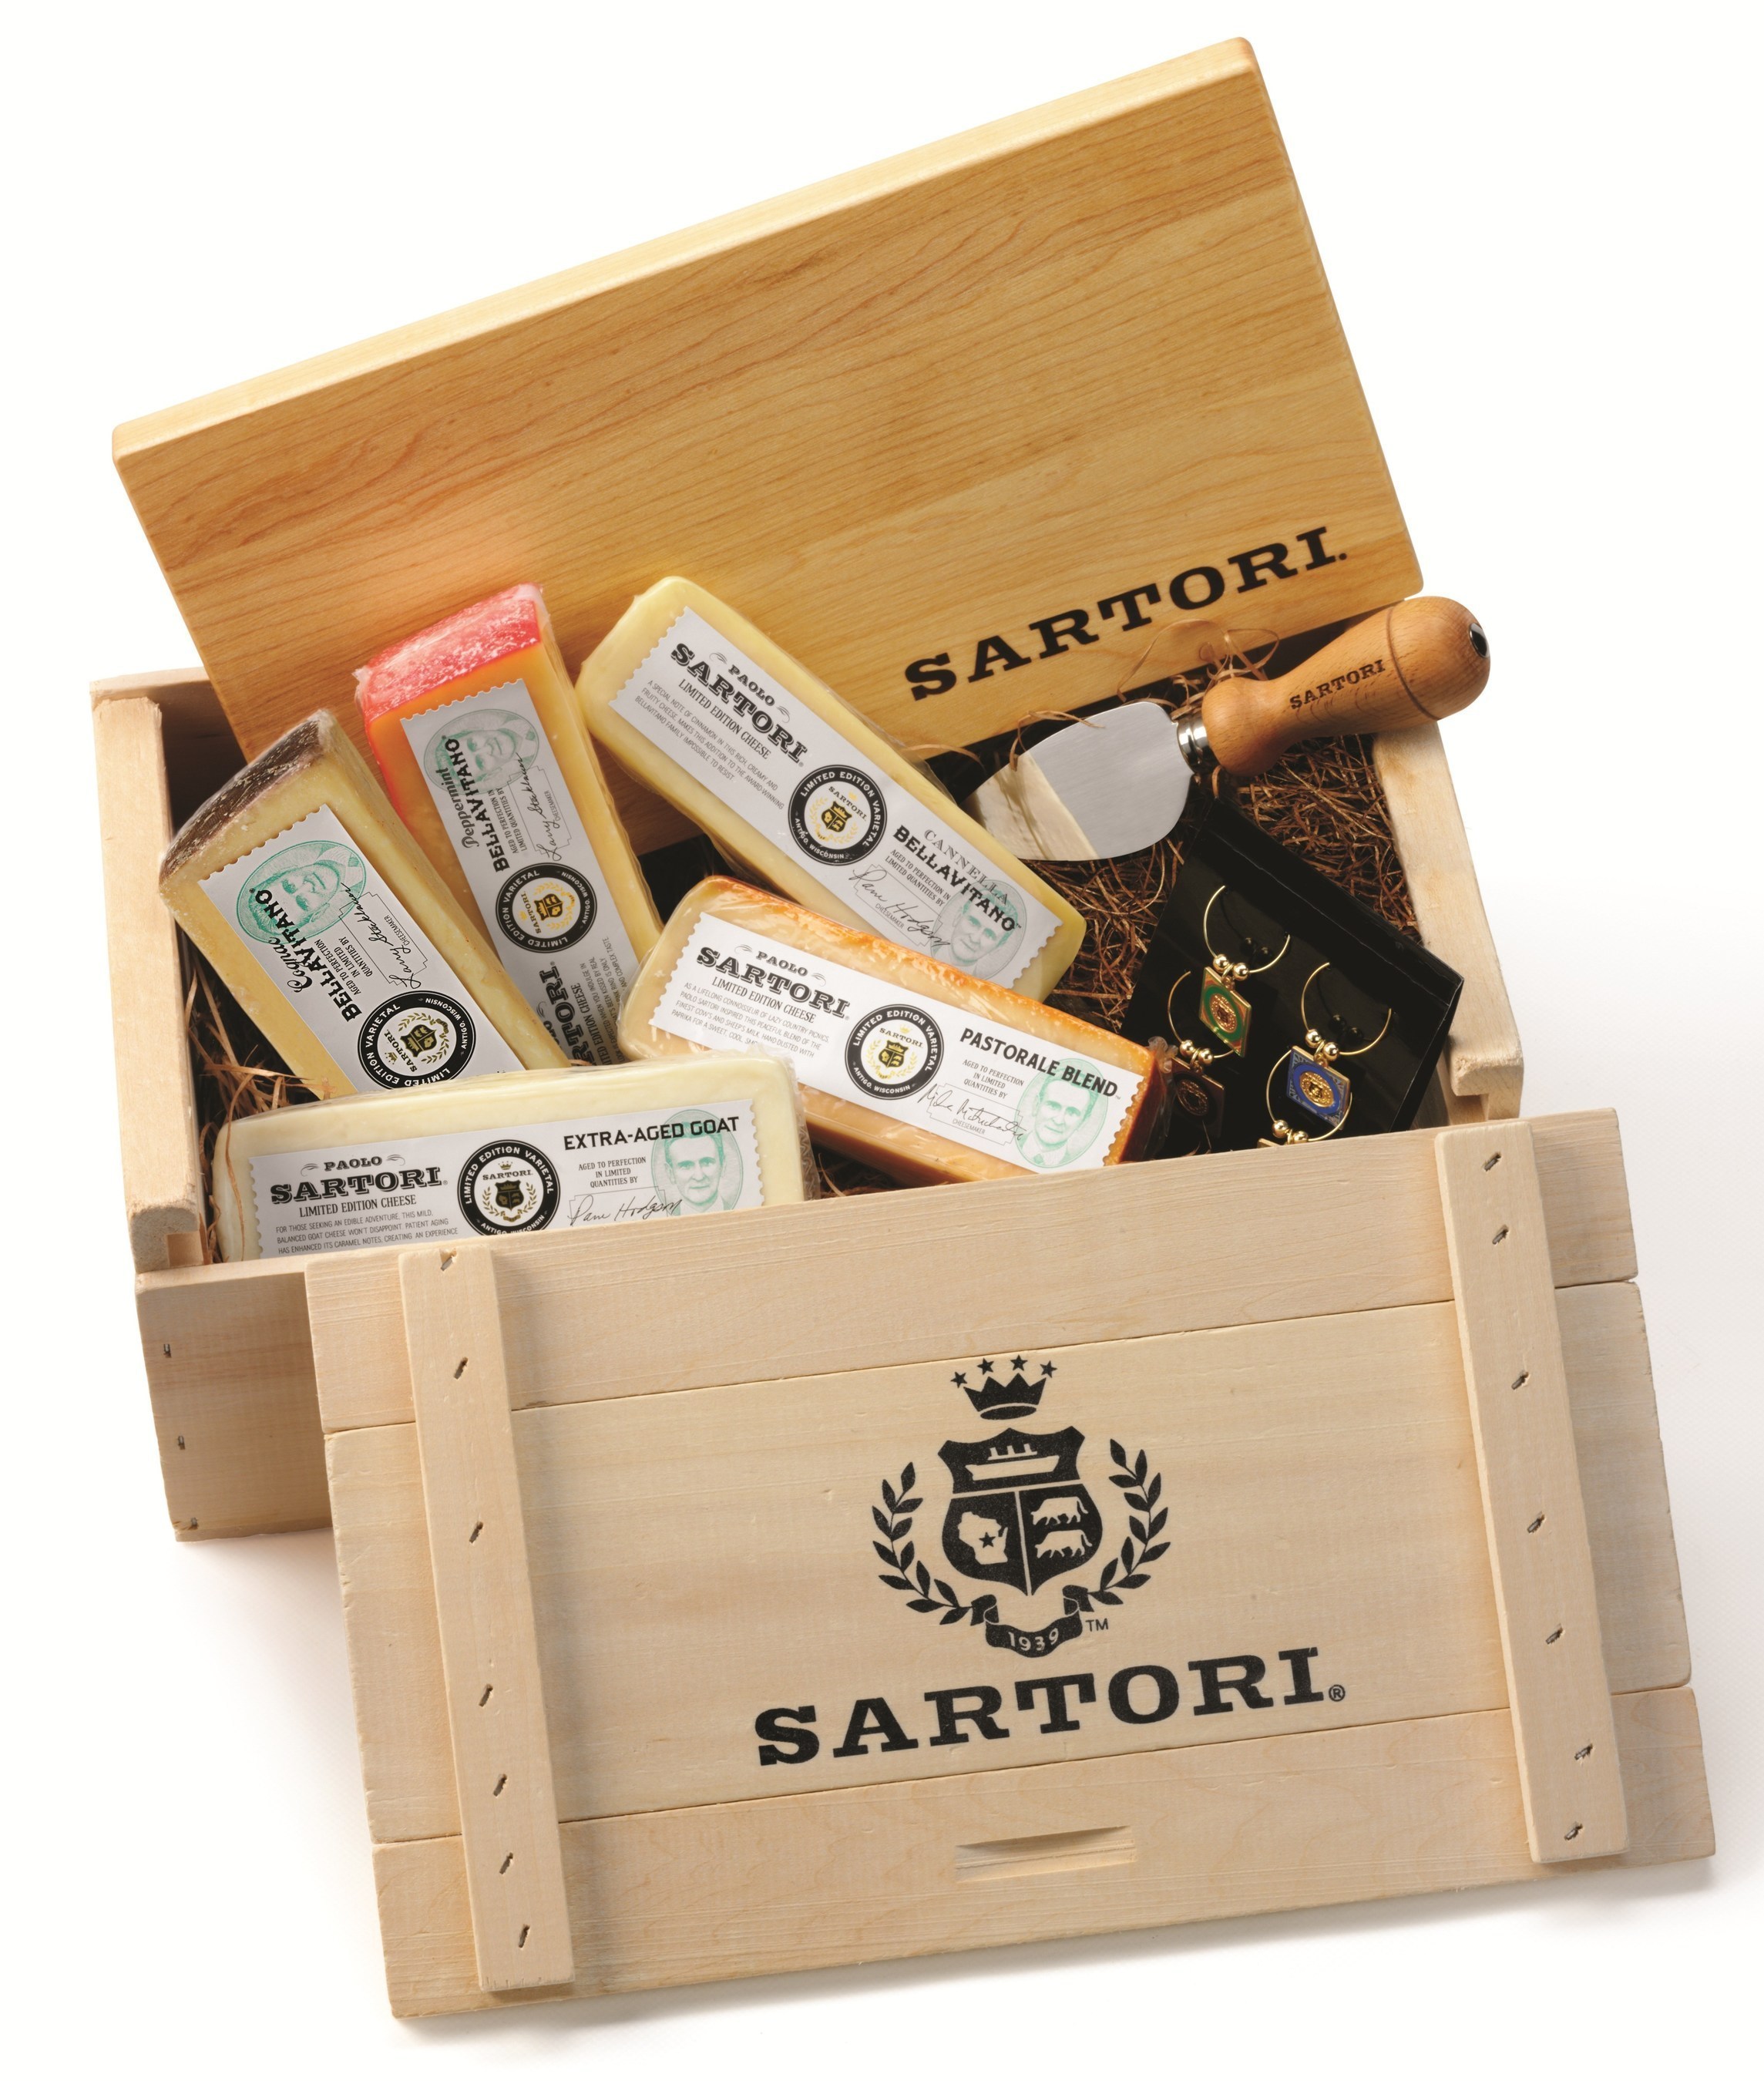 Sartori is releasing 200 Limited Edition Gift Baskets for the month of December, sold exclusively online at sartoricheese.com.